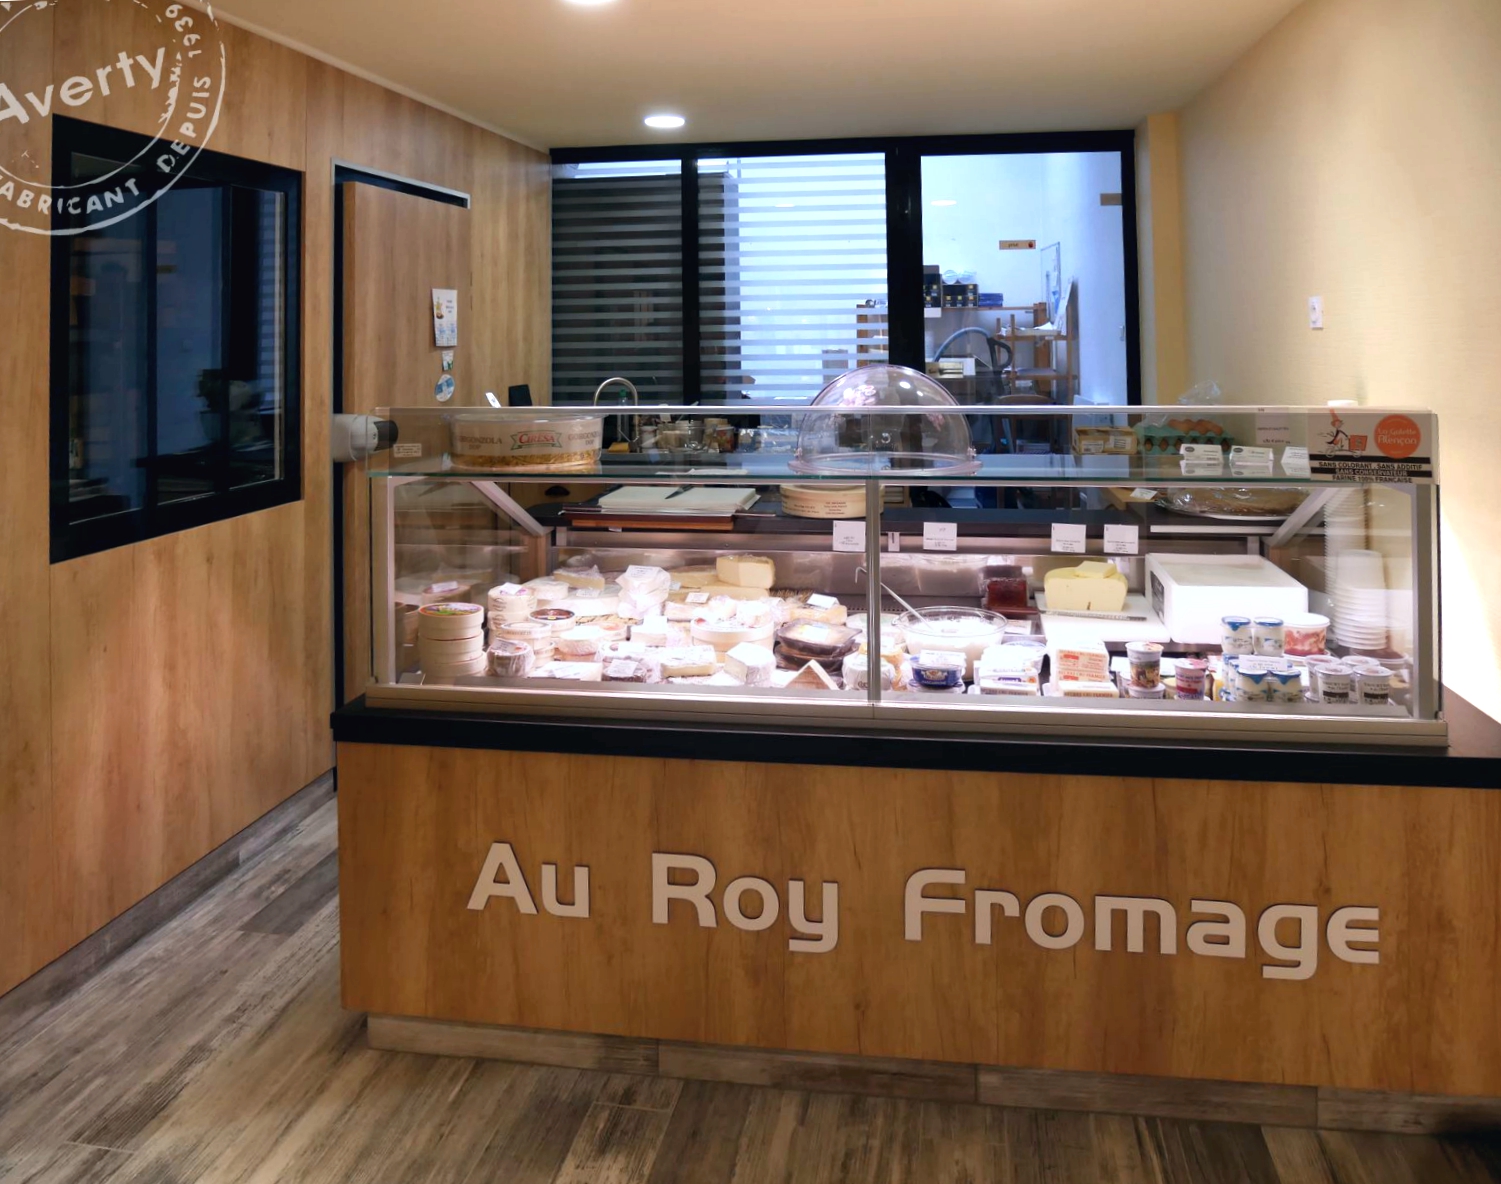 vitrine Fromage bois au roy fromage